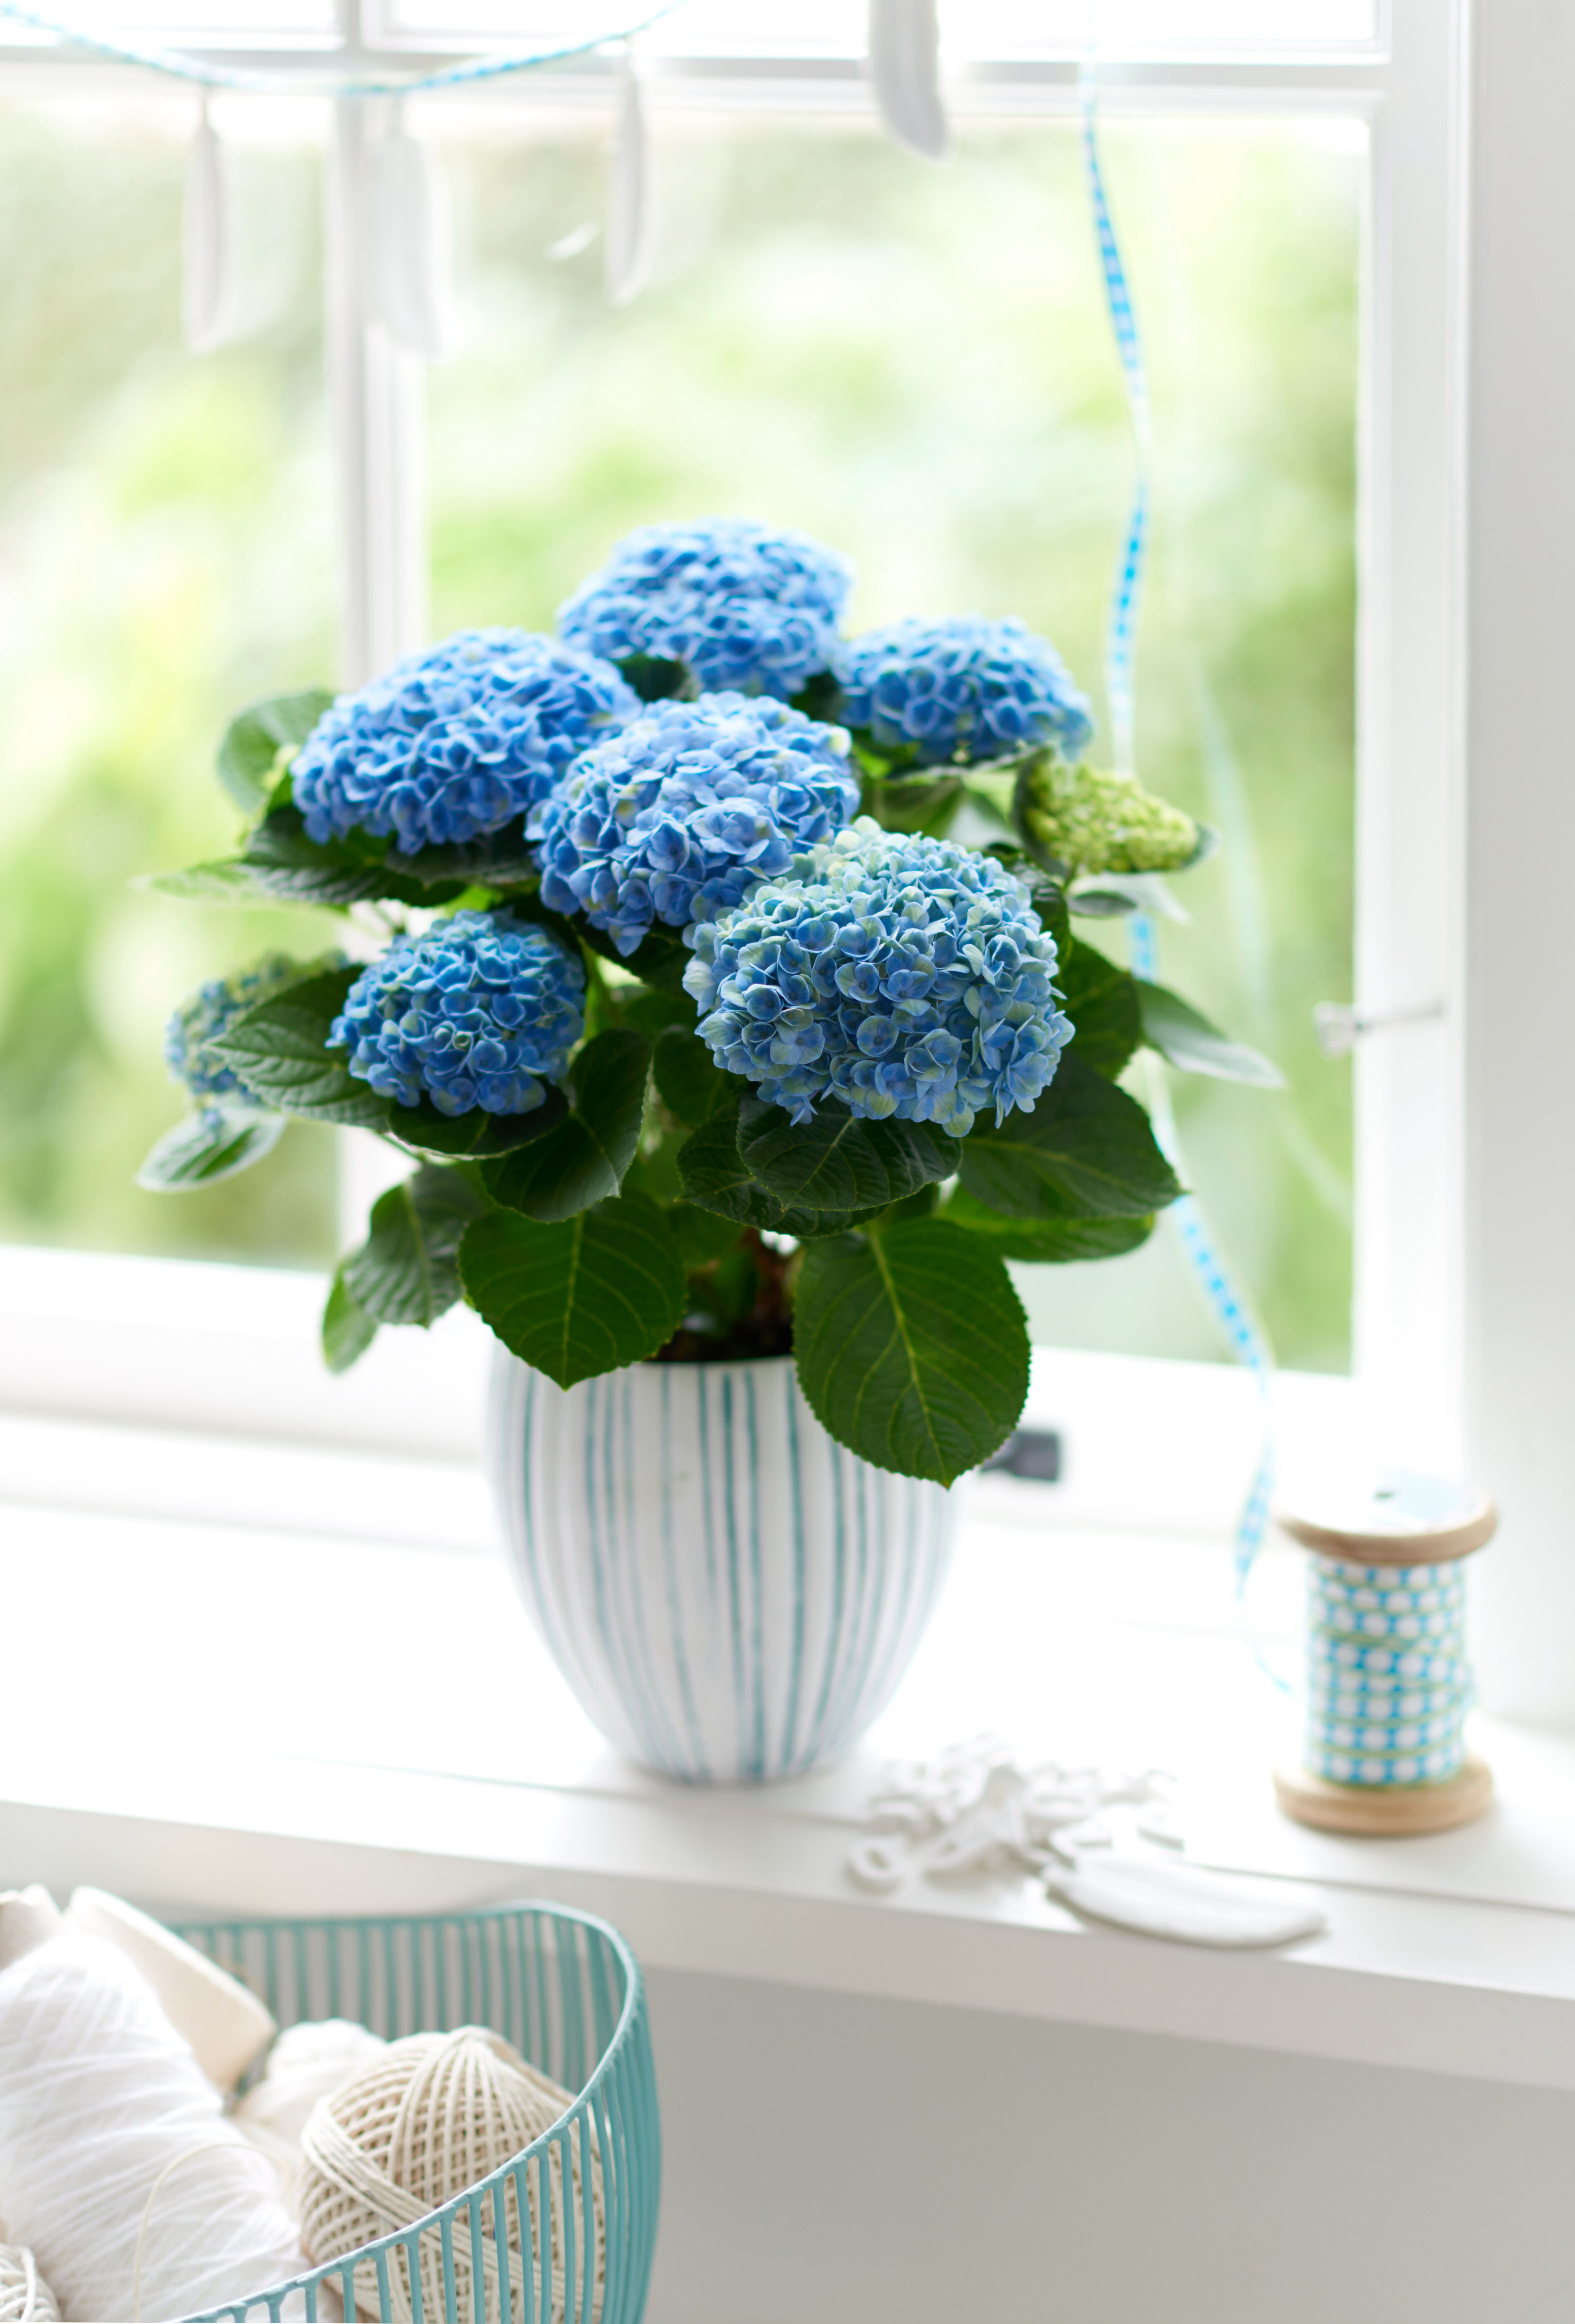 images/plants/hydrangea/hyd-magical-everlasting-revolution/hyd-magical-everlasting-revolution-0078.jpg